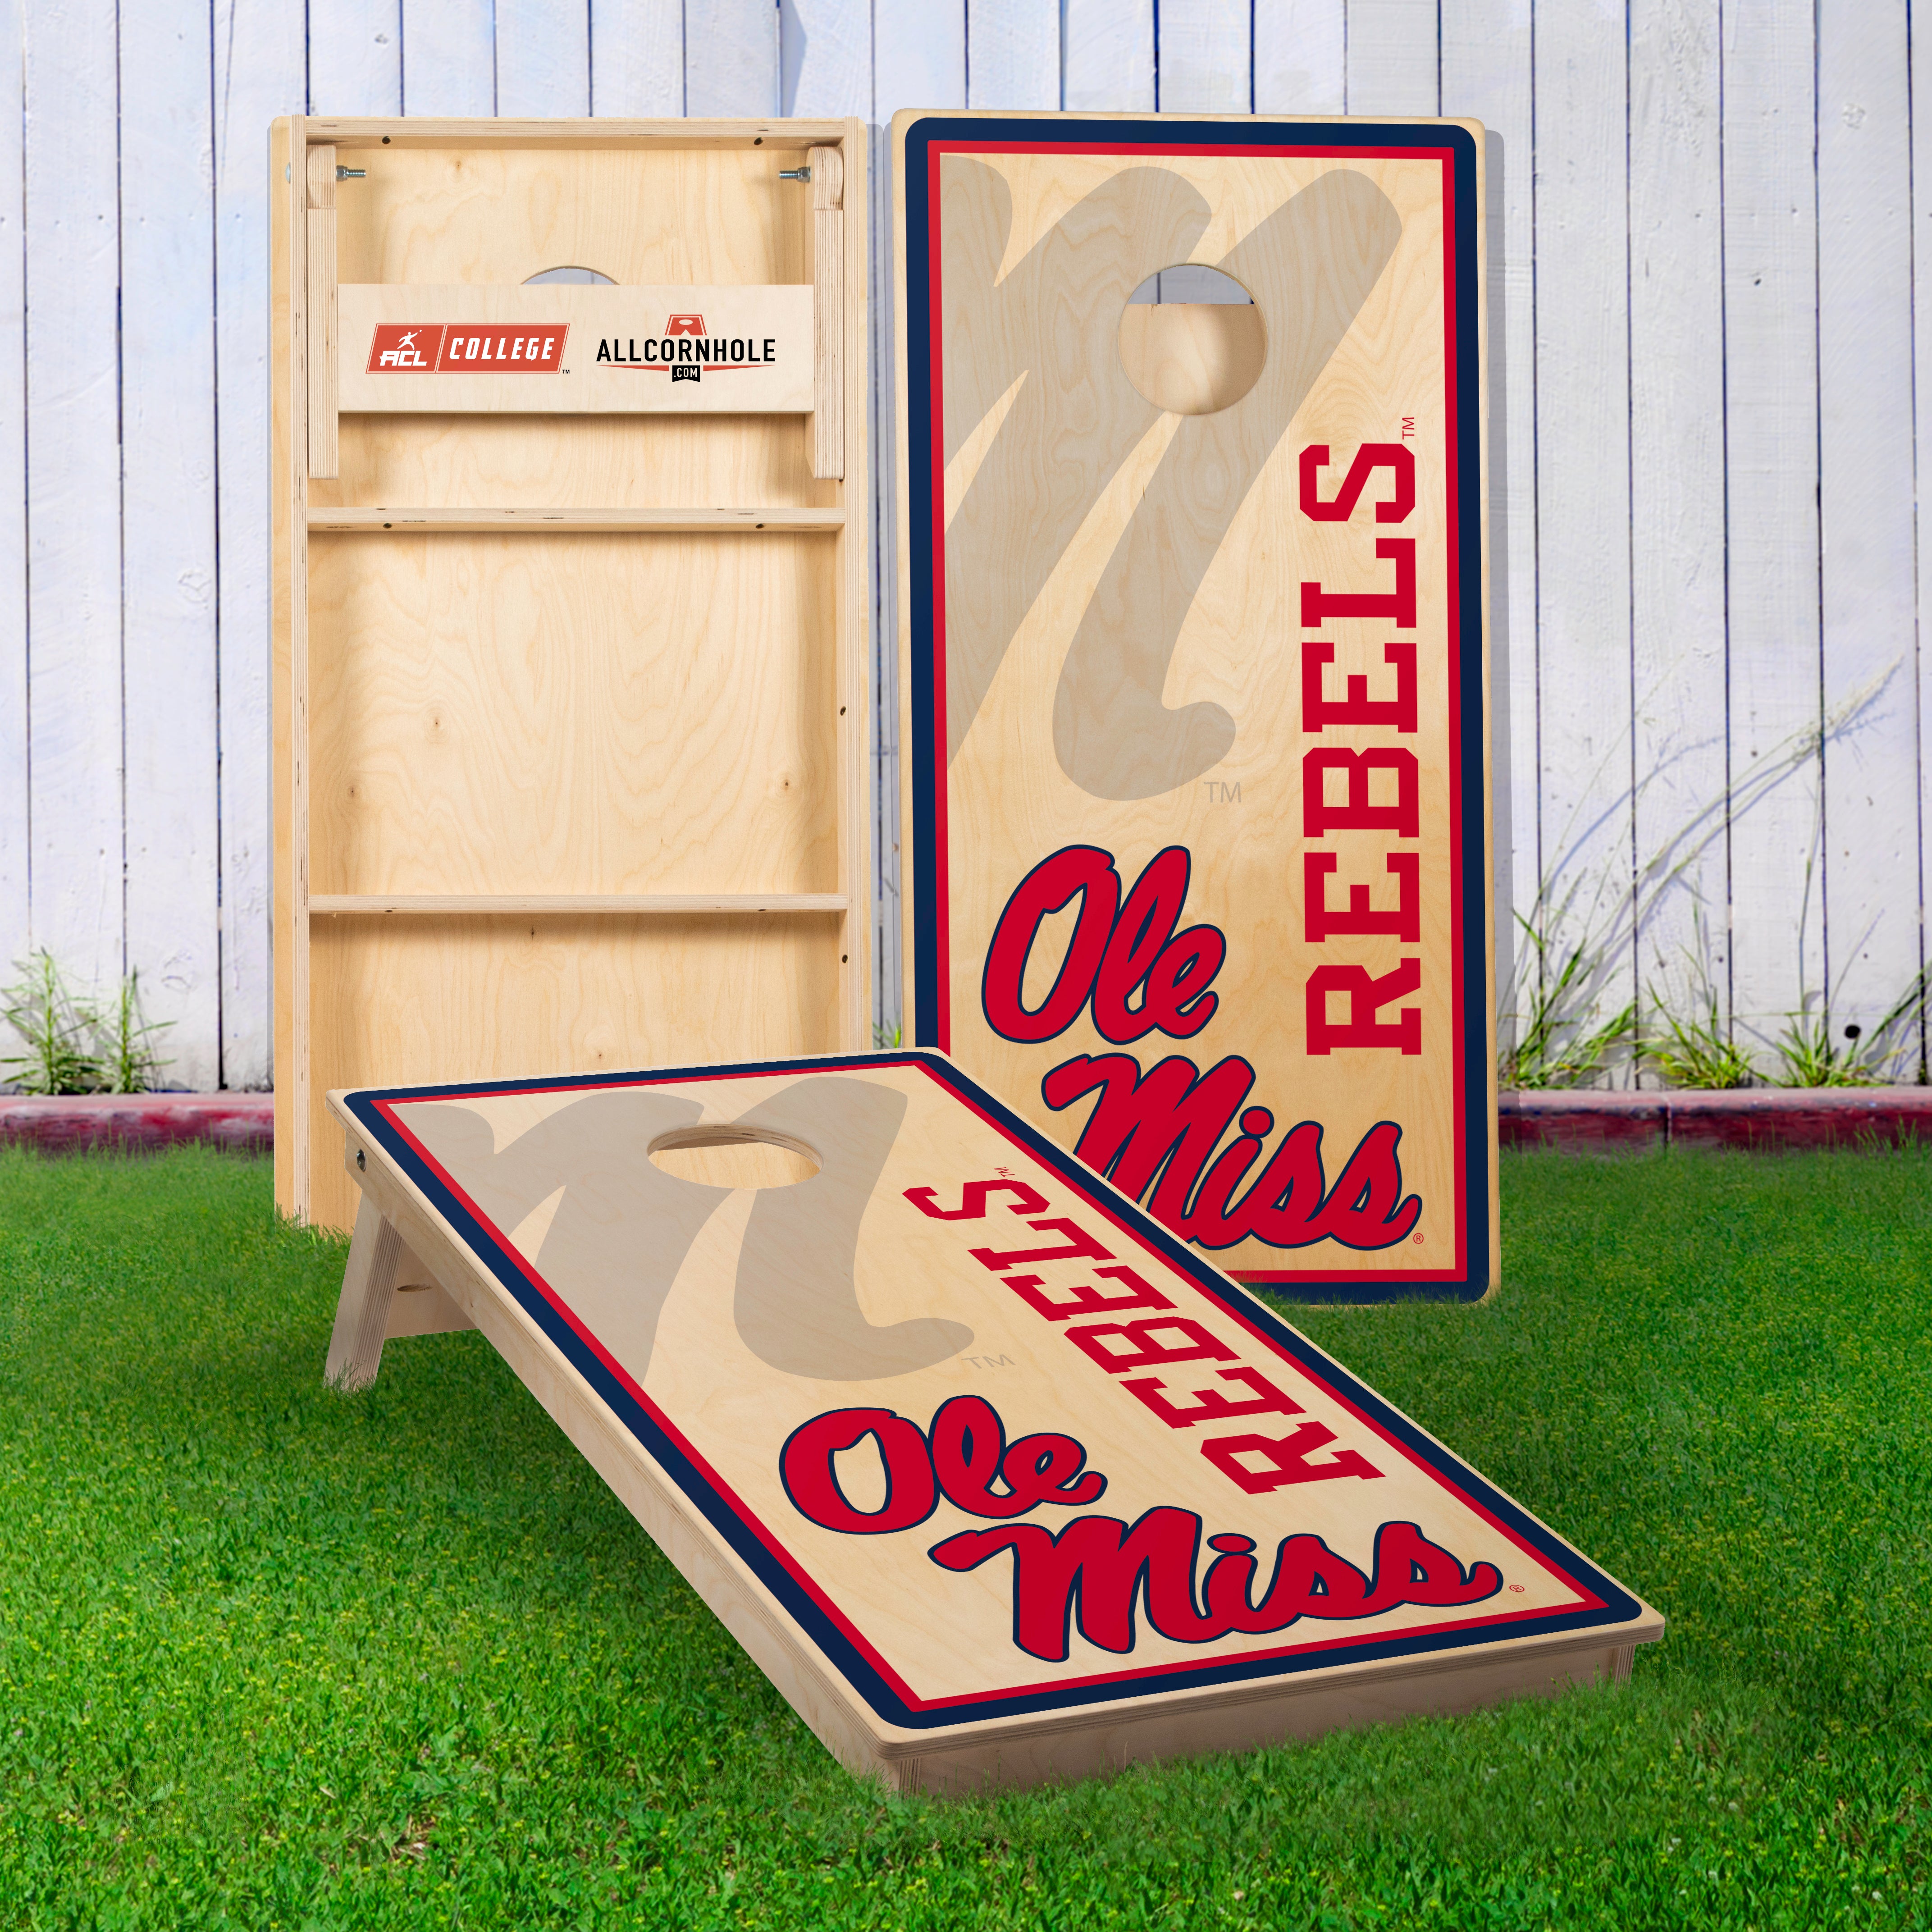 Officially Licensed Collegiate Cornhole Boards - University of Mississippi